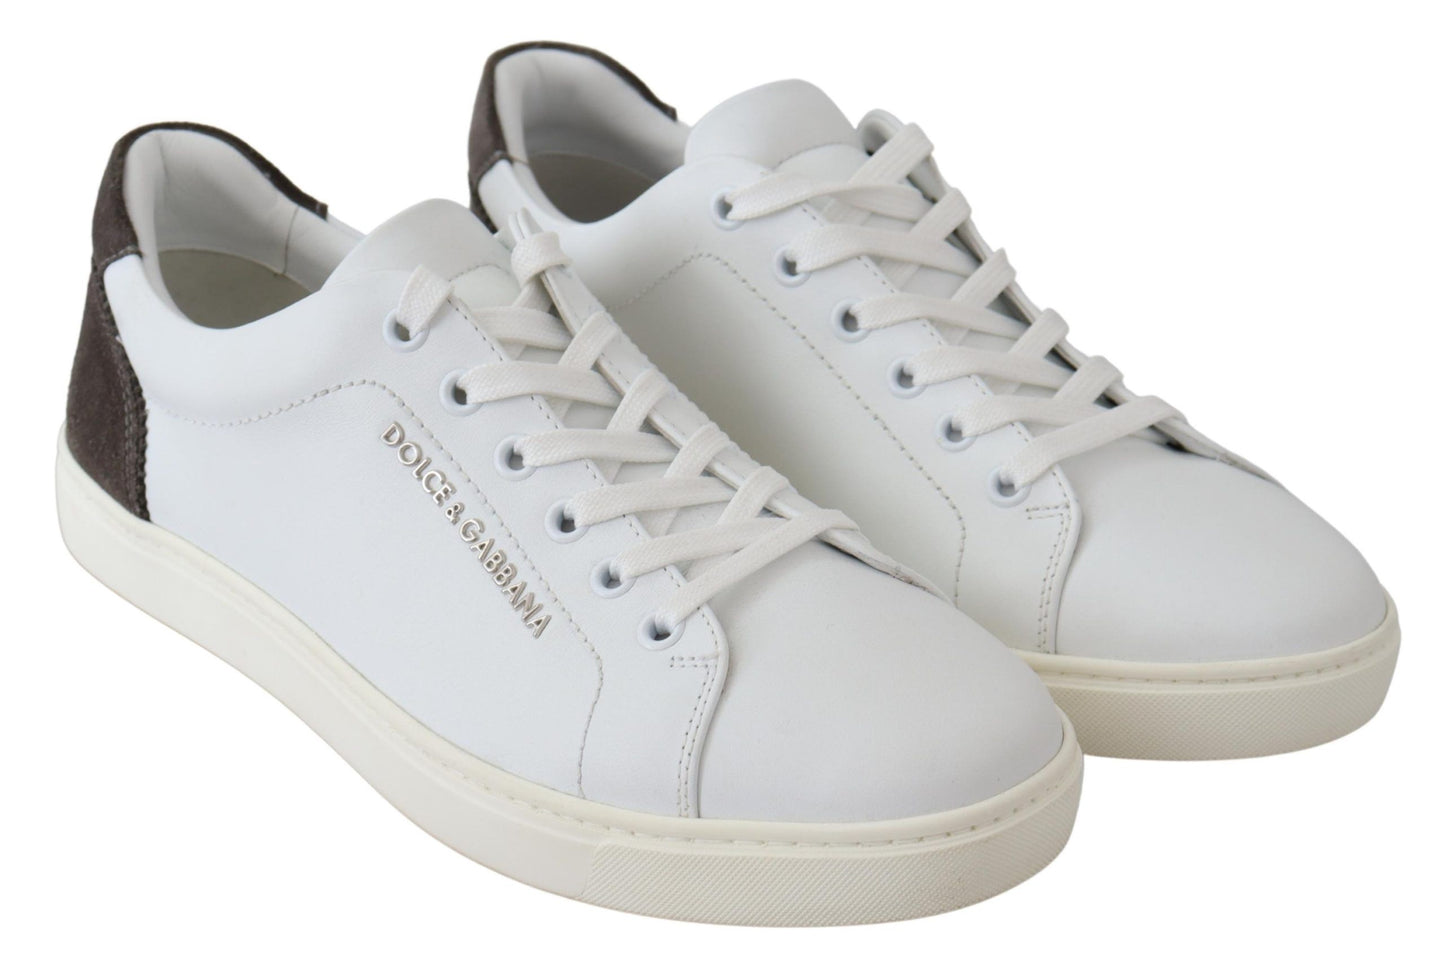 White Leather Low Top Casual Mens Sneakers Shoes